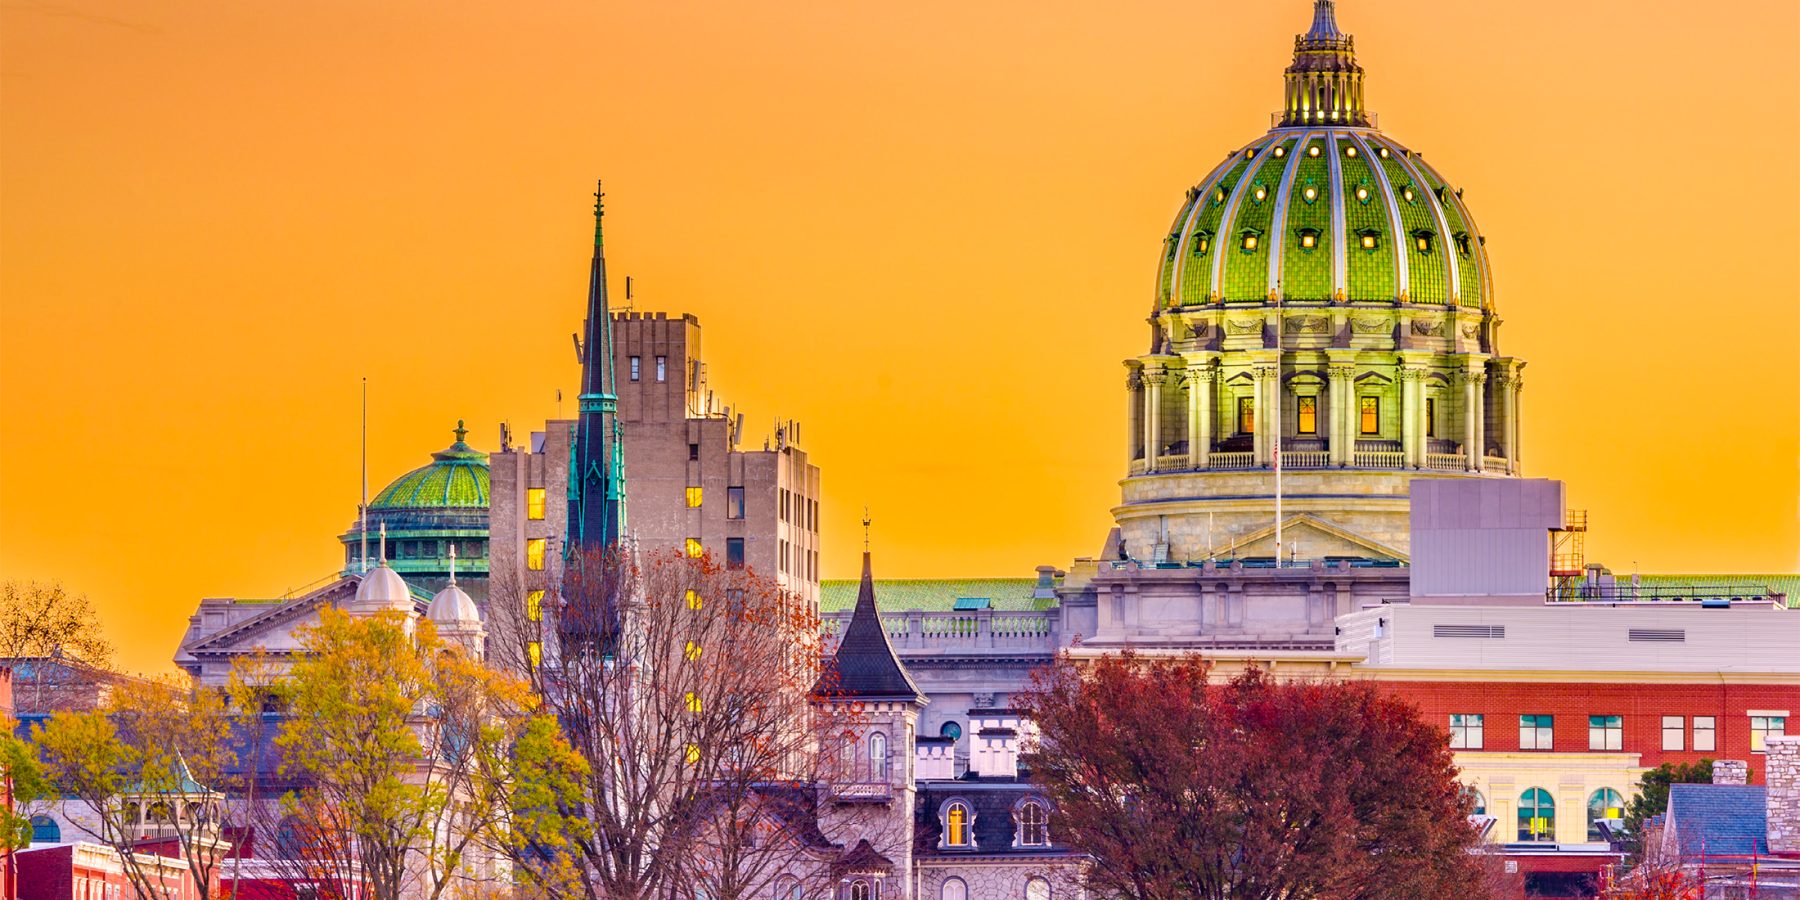 Colorful image of PA Capitol and surrounding buildings